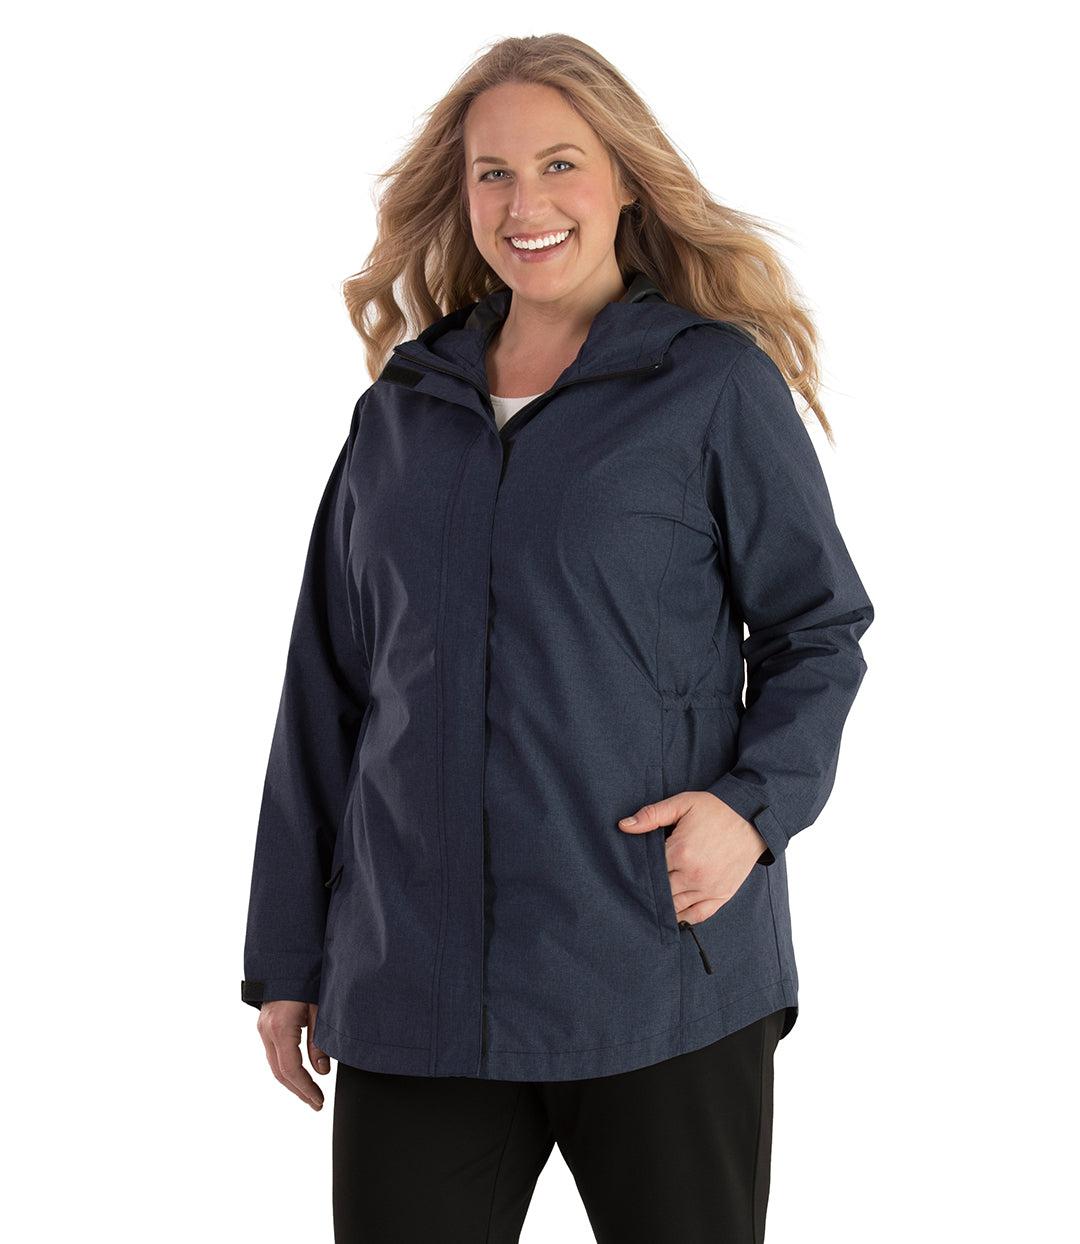 Plus size woman, front view, wearing a JunoActive plus size Waterproof Breathable Wind & Rain Jacket in navy blue. The jacket has a hood, double front closure and side pockets. The length of the plus size jacket hits just below the hips.